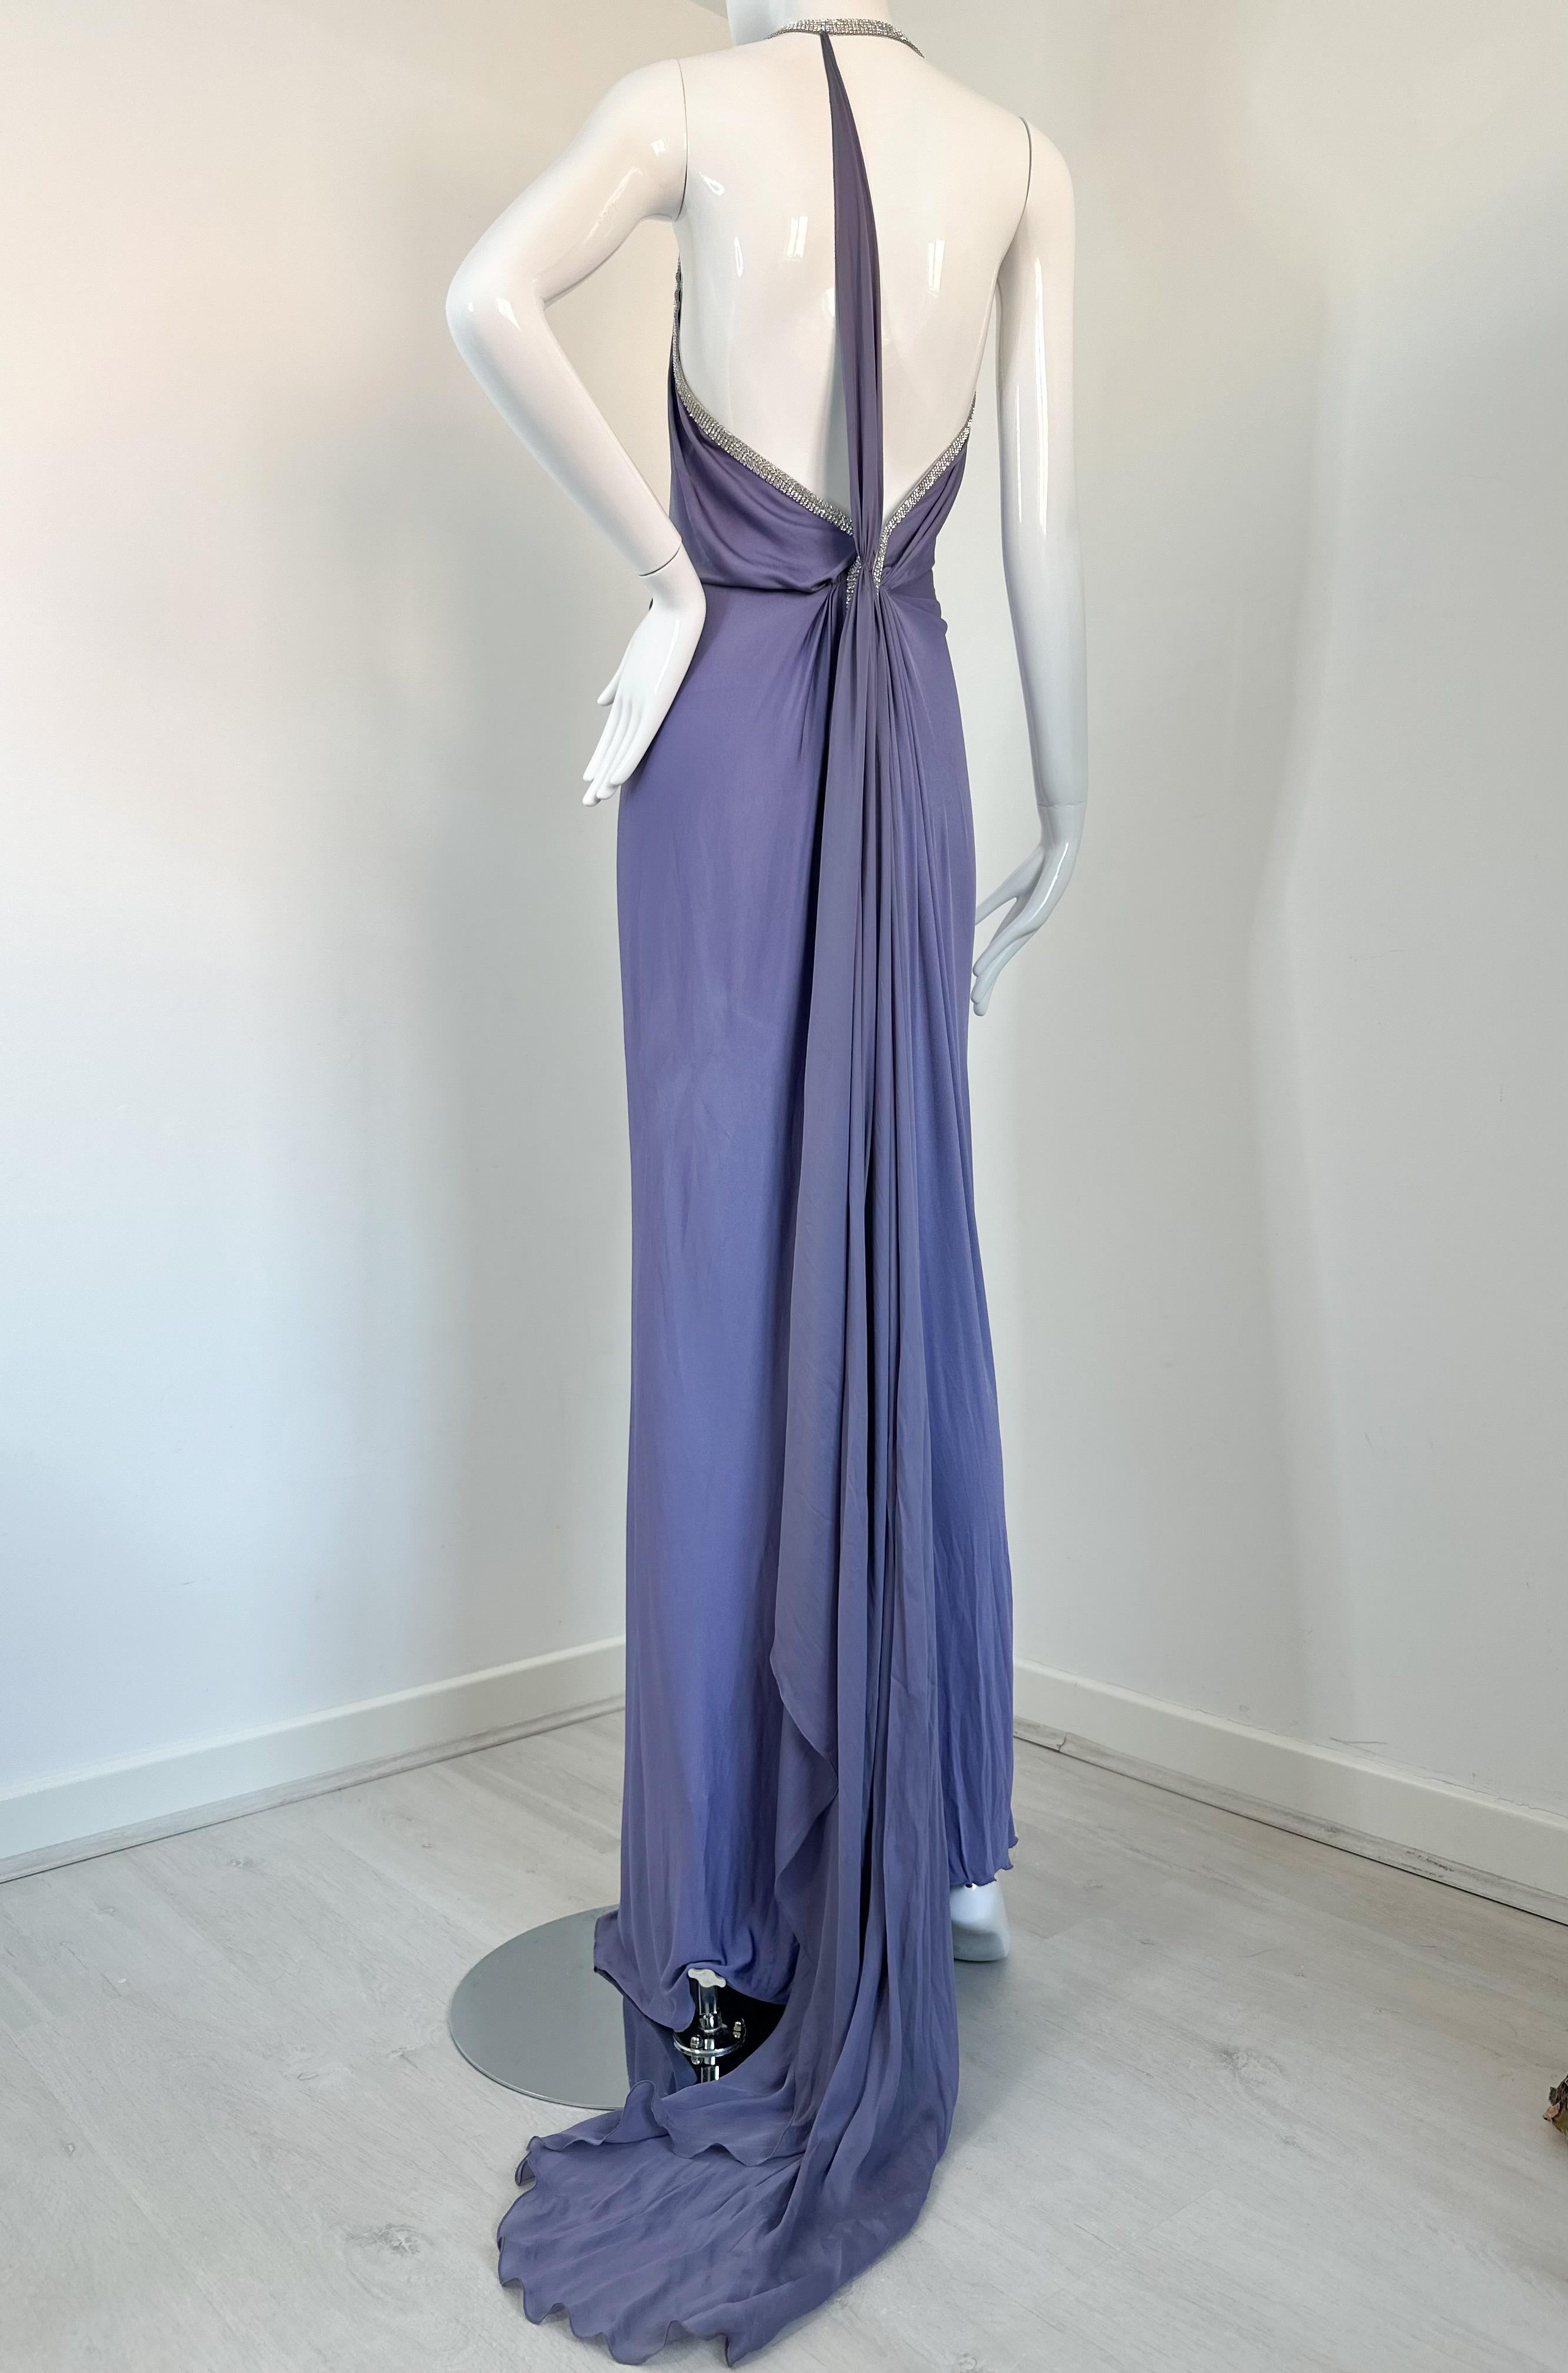 Roberto Cavalli 2004 lilac maxi gown with crystal embellishments 

Size 38 
Gorgeous, rare dress with sexy open back and silk tail that can also be wrapped around the neck

All tags on the dress are in pictures. Missing main brand tag 
Good vintage